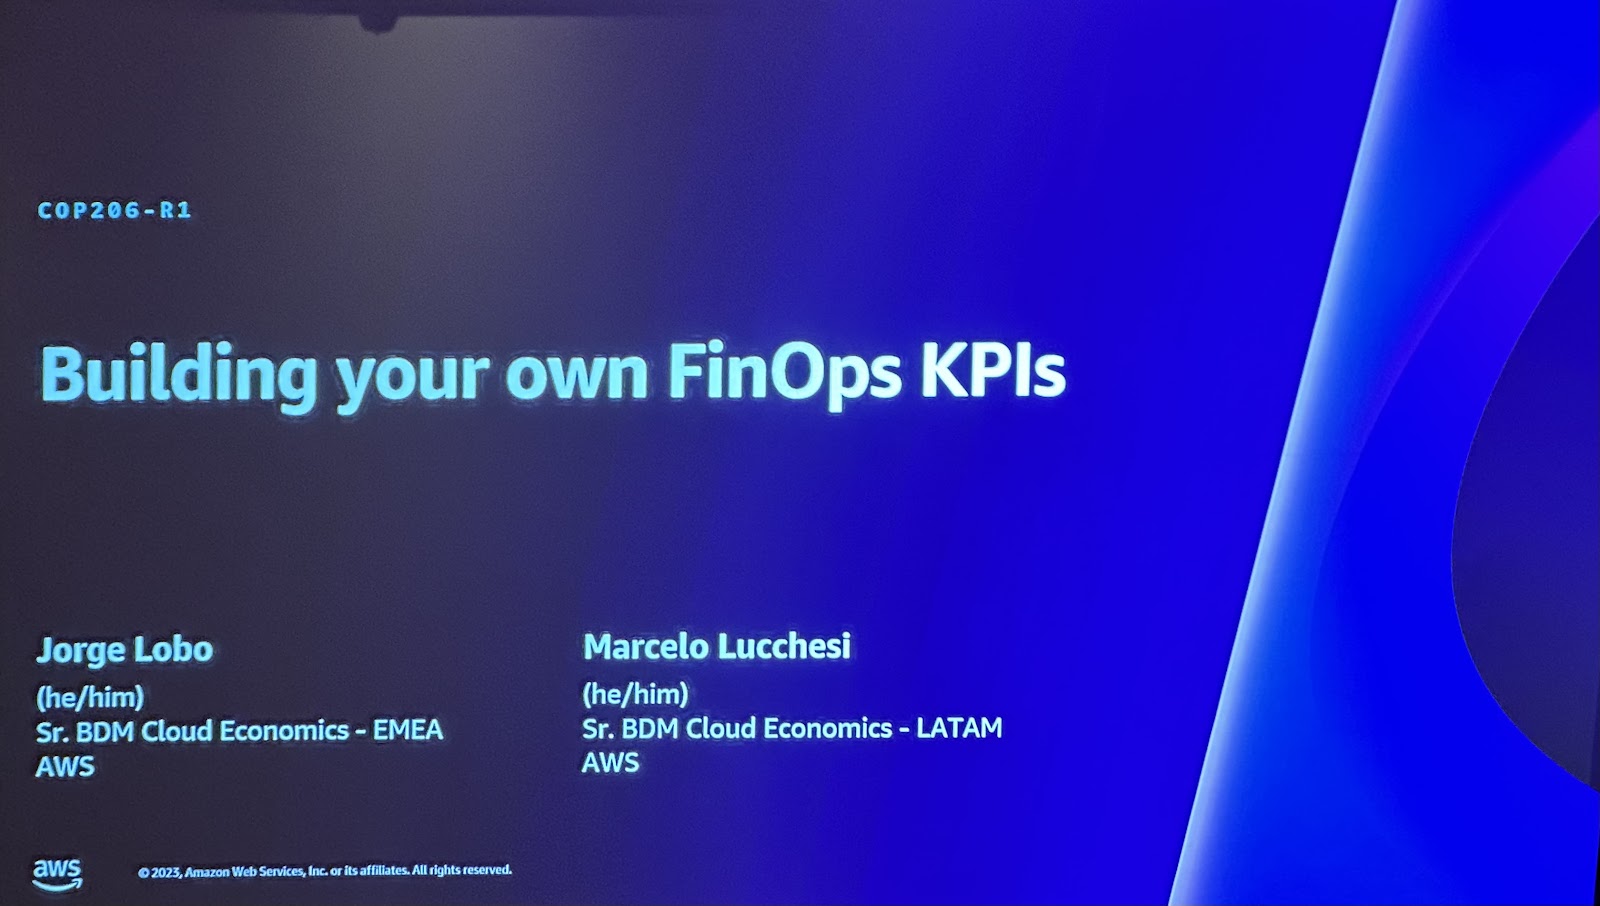 Building your own FinOps KPIs